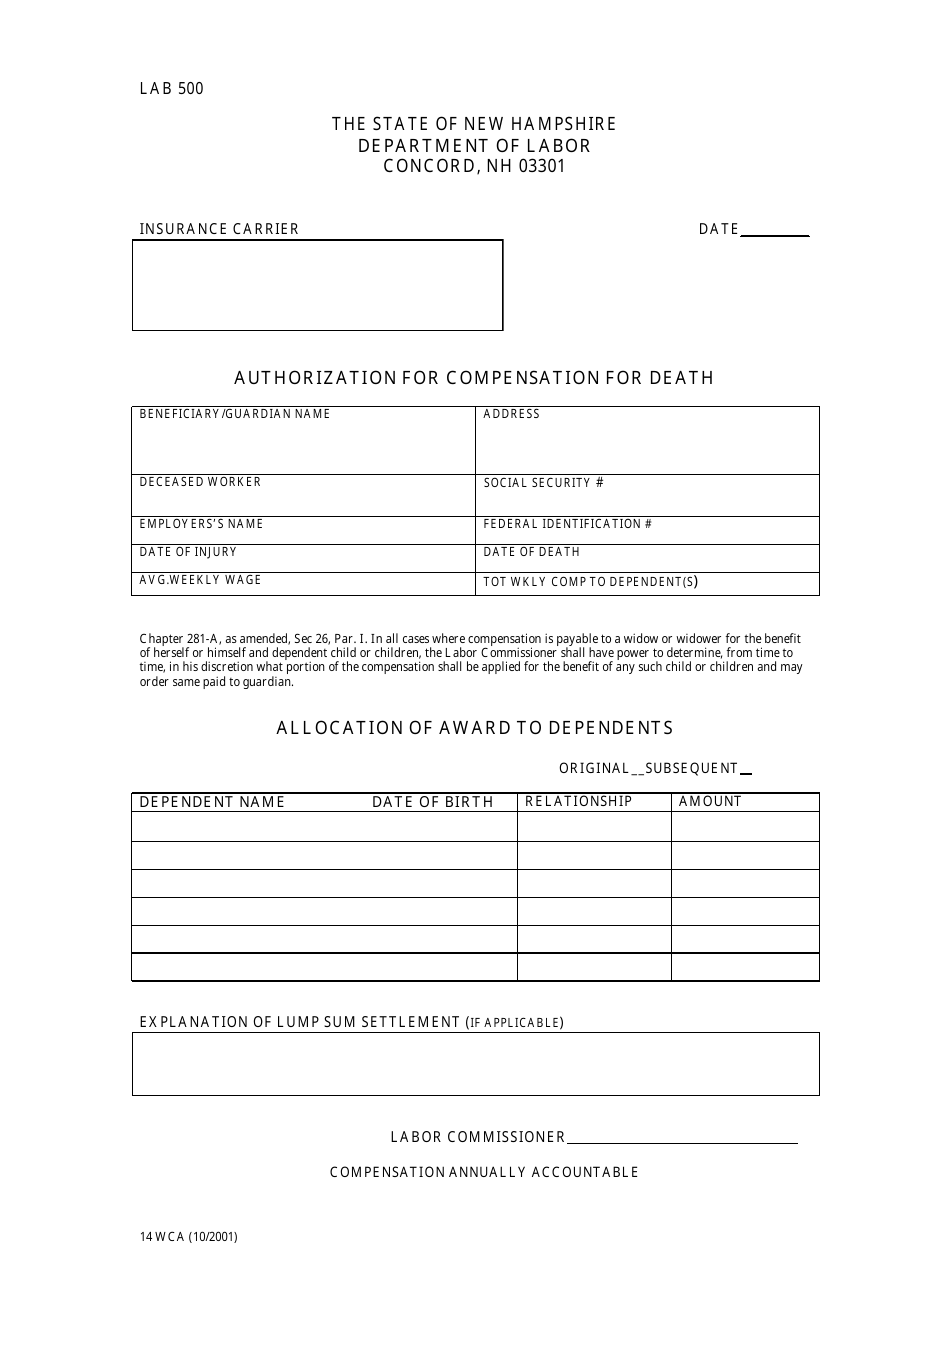 Form 14 WCA Authorization for Compensation for Death - New Hampshire, Page 1